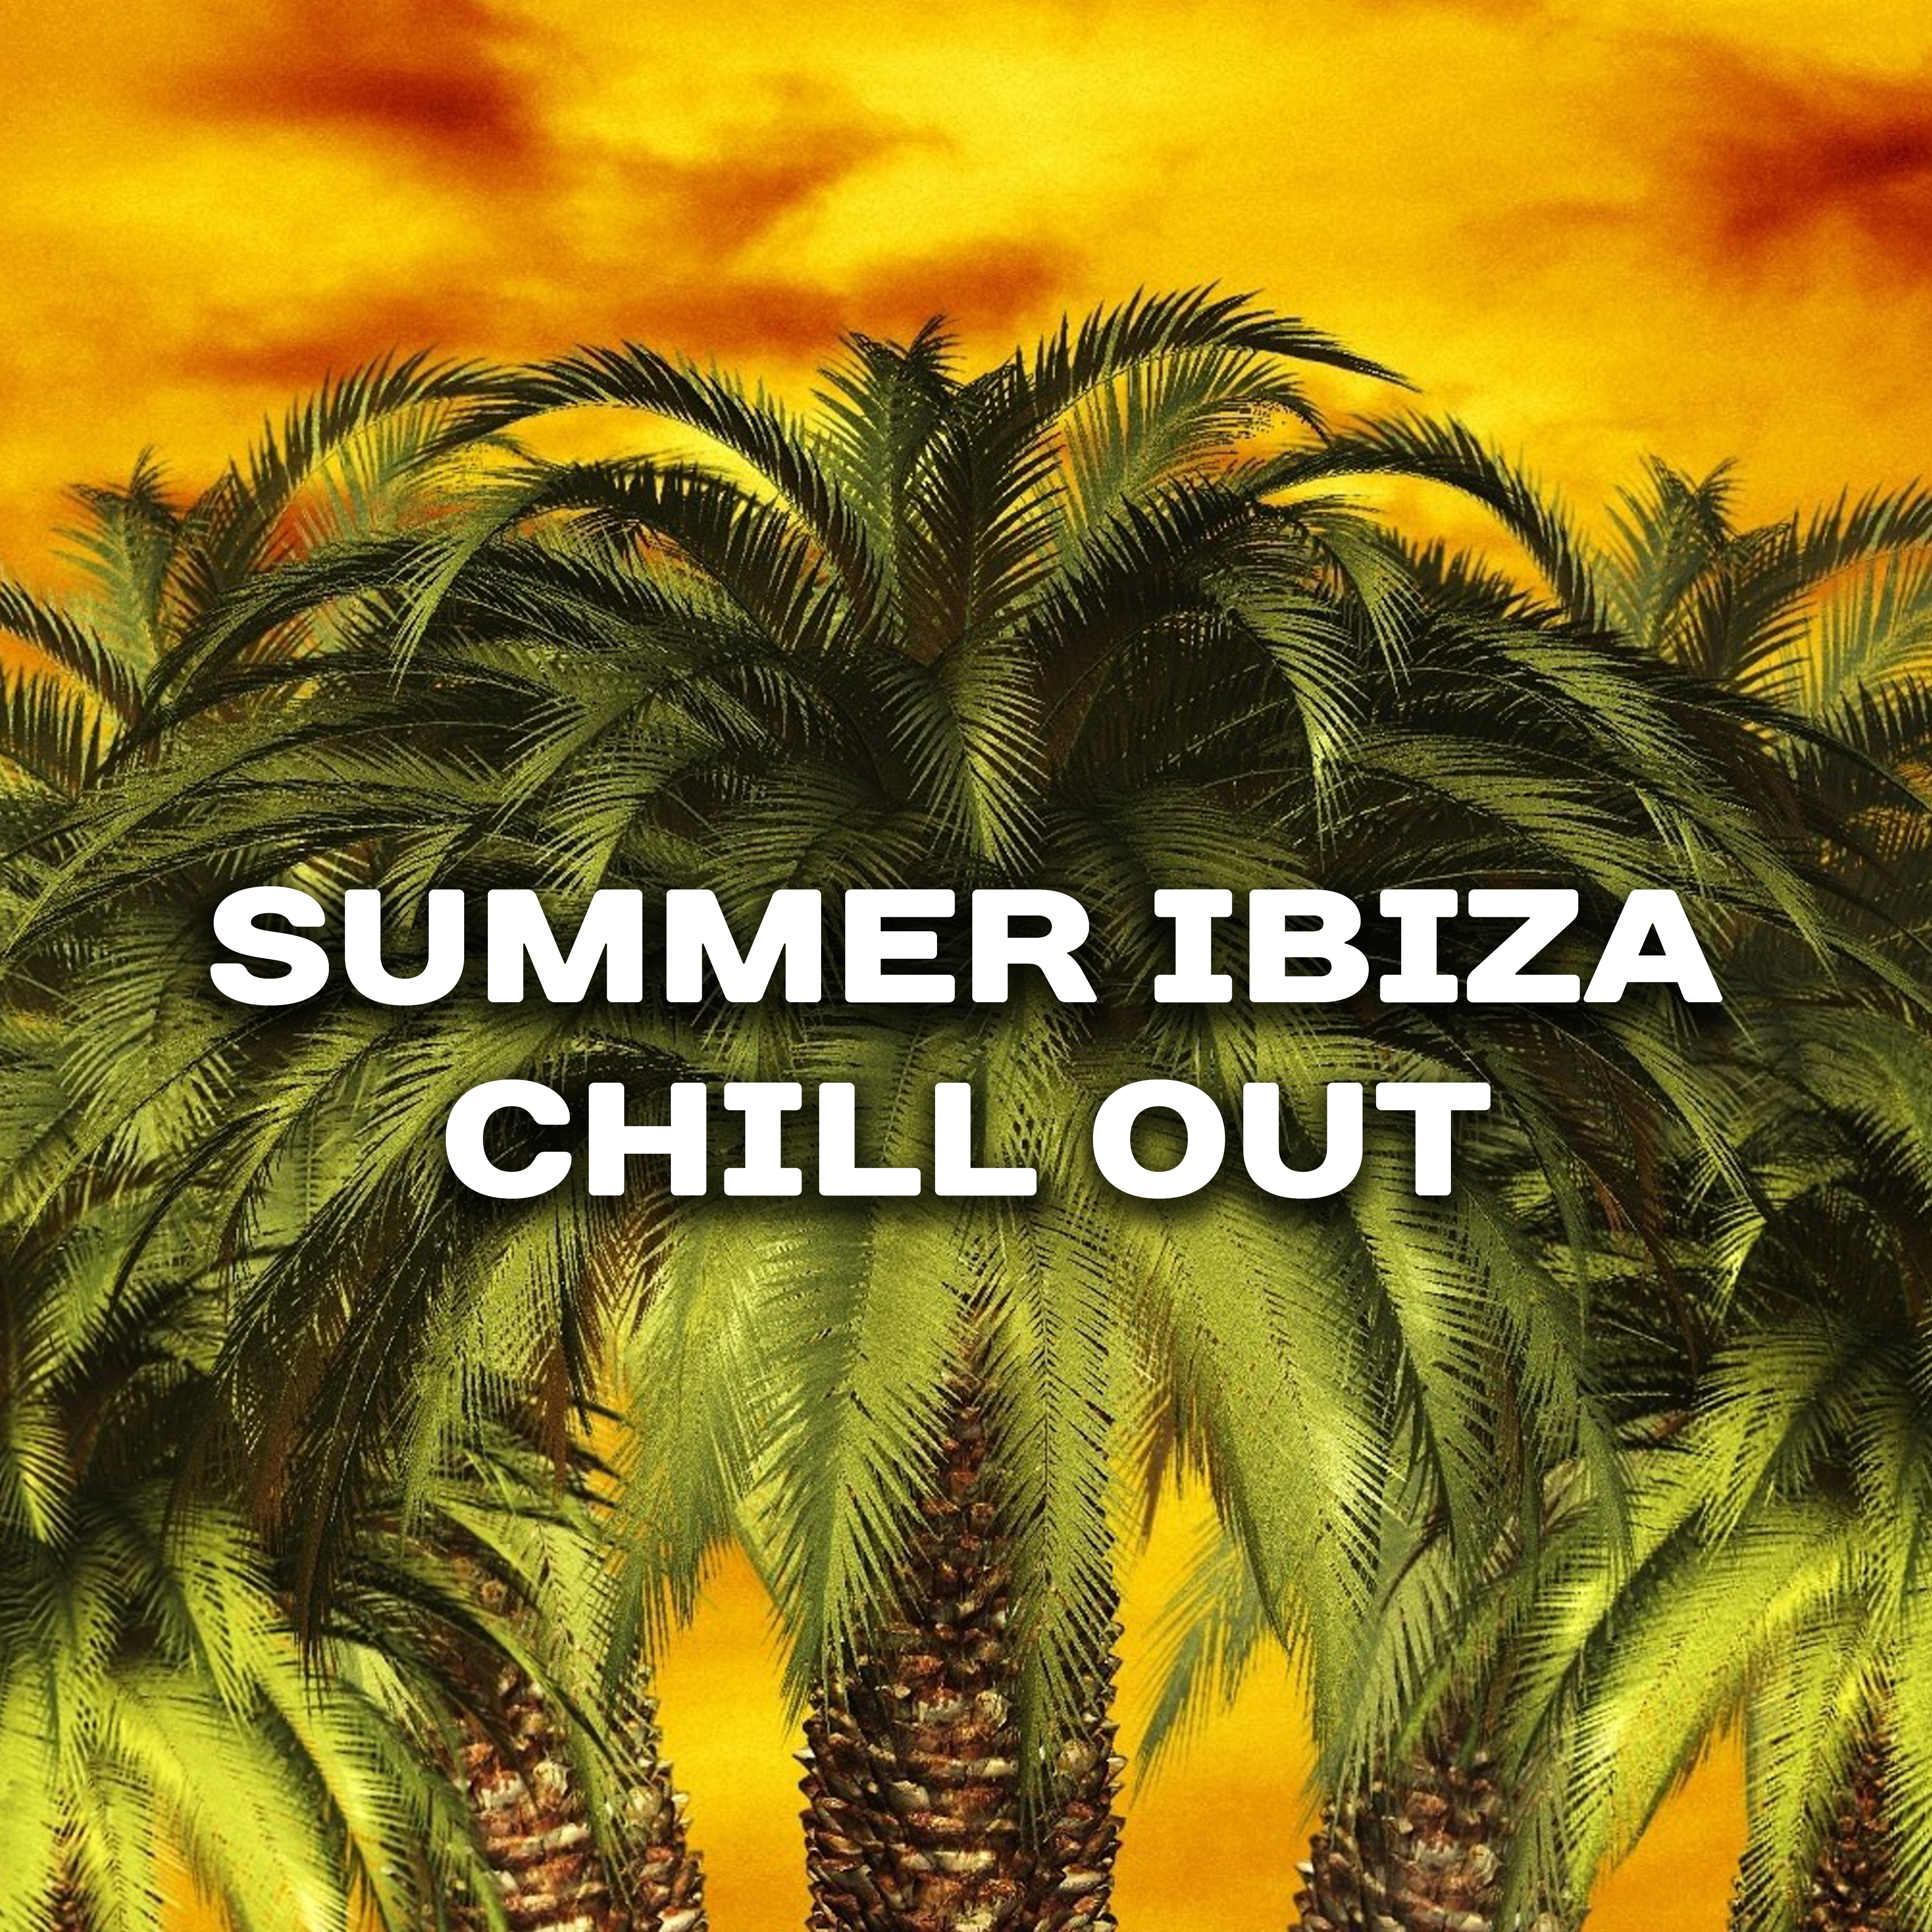 Summer Ibiza Chill Out  Relaxing Sounds to Calm Down, Holiday Vibes, Beach House, Sun  Sand